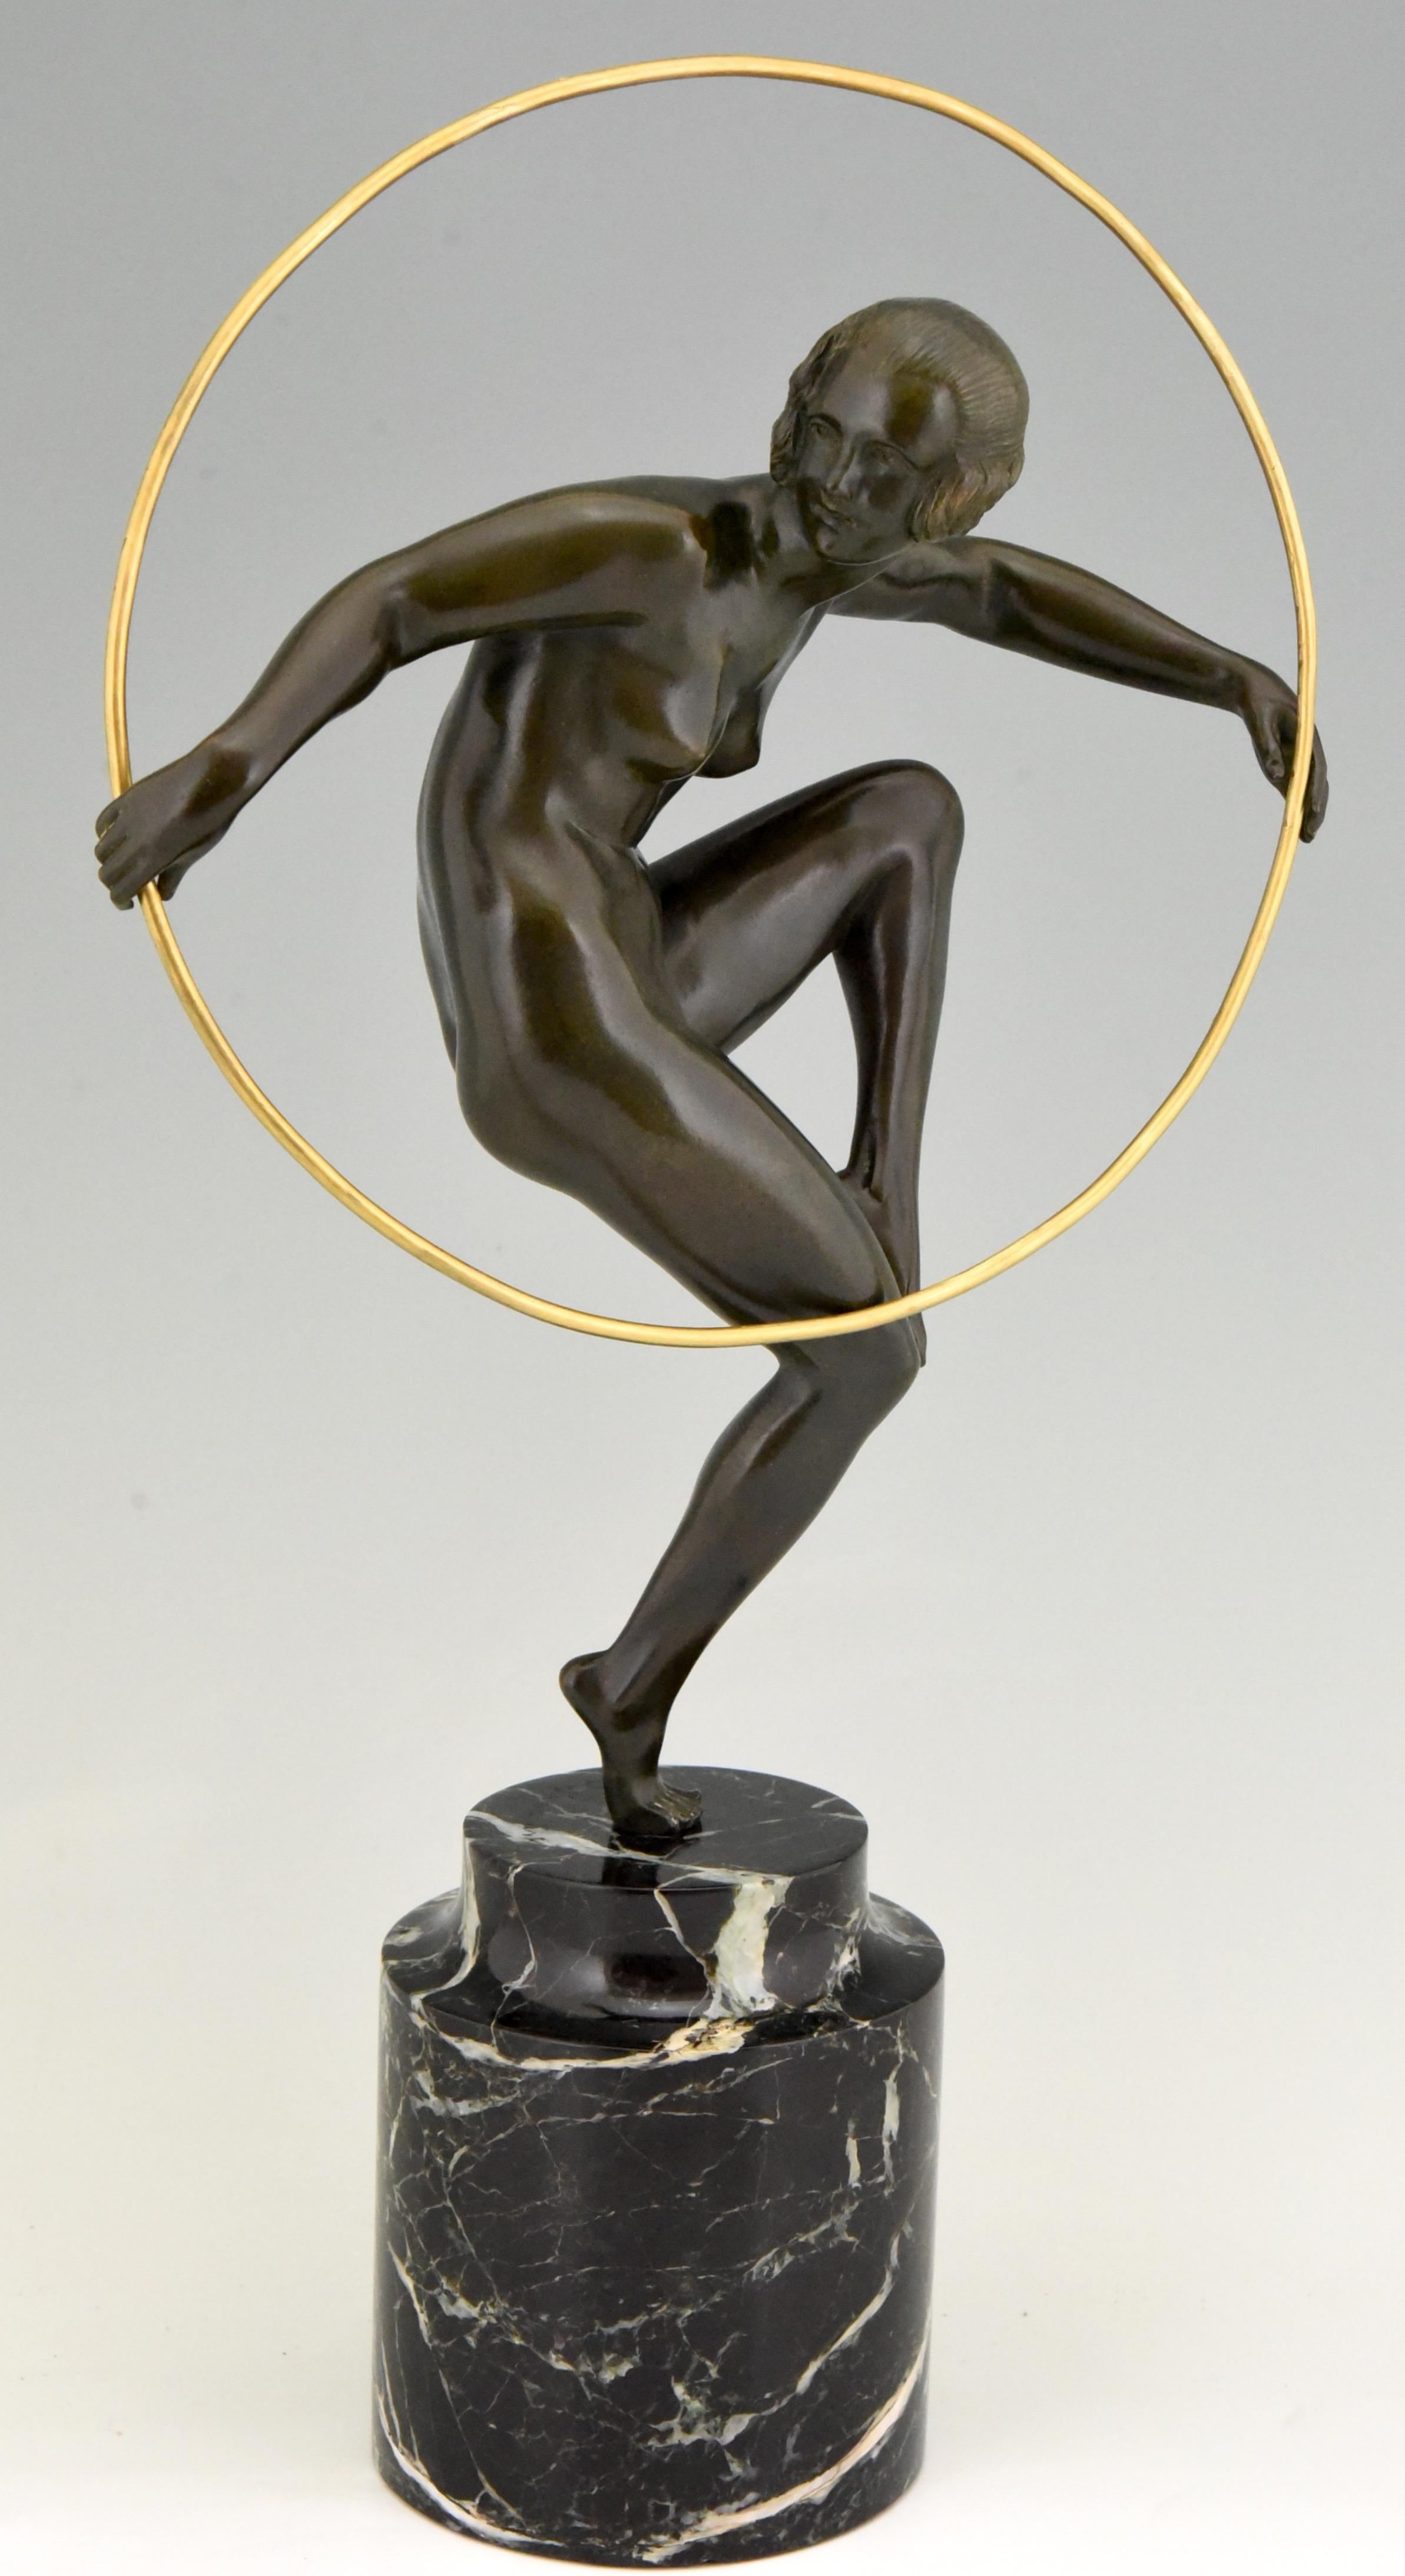 Girl with hoop.
Nude dancing on one leg holding a hoop.
Artist/ Maker:
Marcel André Bouraine, 1886-1948. 
Signature/ Marks:
A. Bouraine.
Style:
Art Deco.
Date:
circa 1930.
Material: 
Patinated bronze on a marble base. 
Origin: